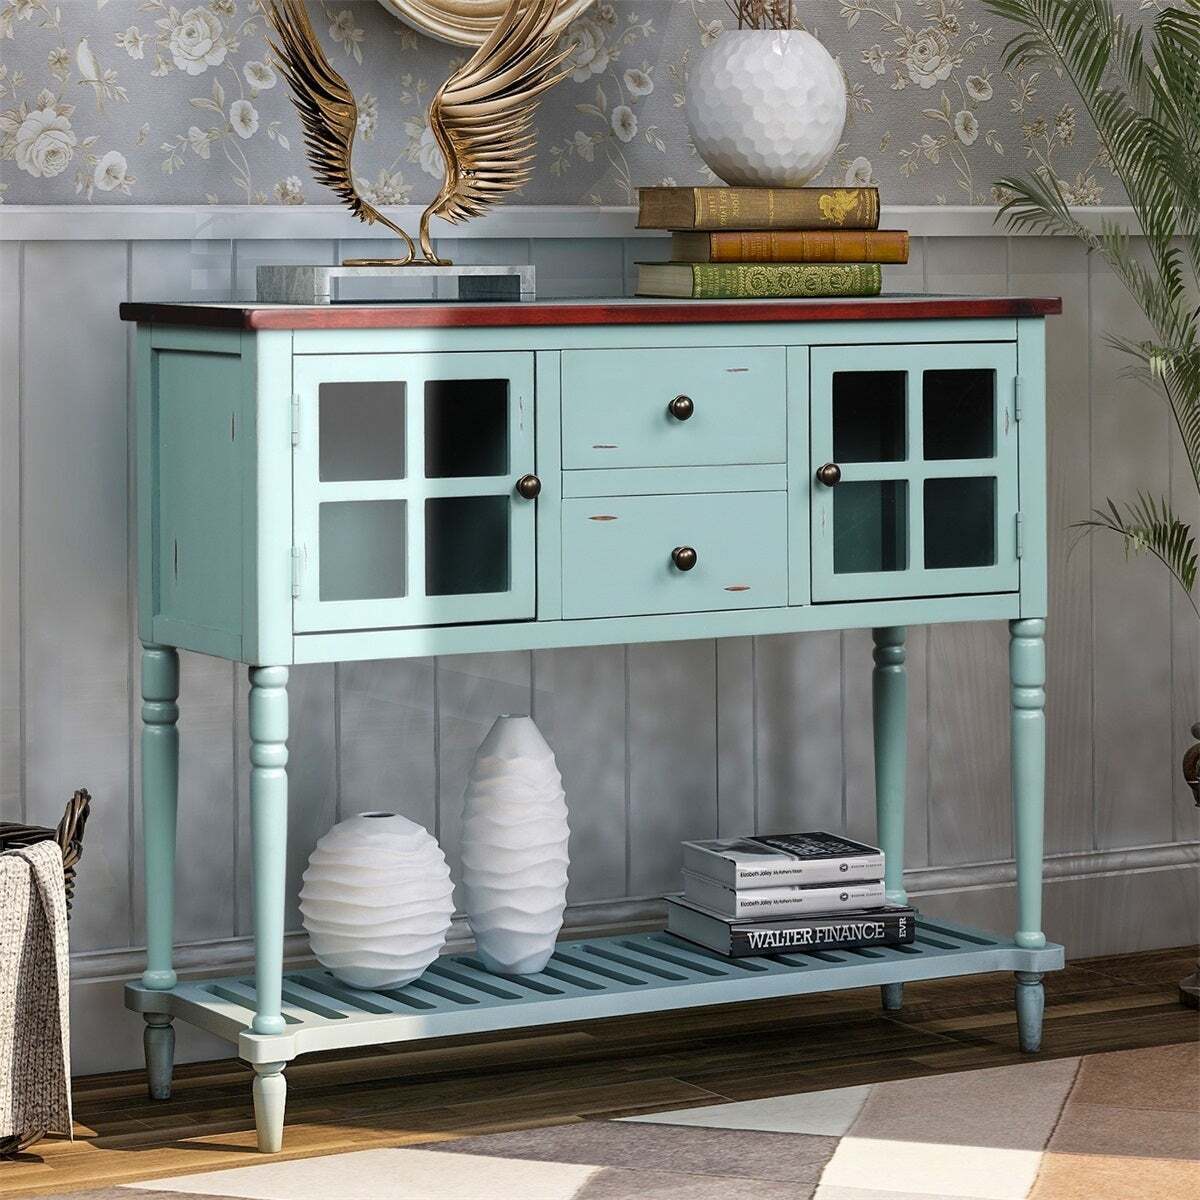 A teal small glass front cabinet on tall legs